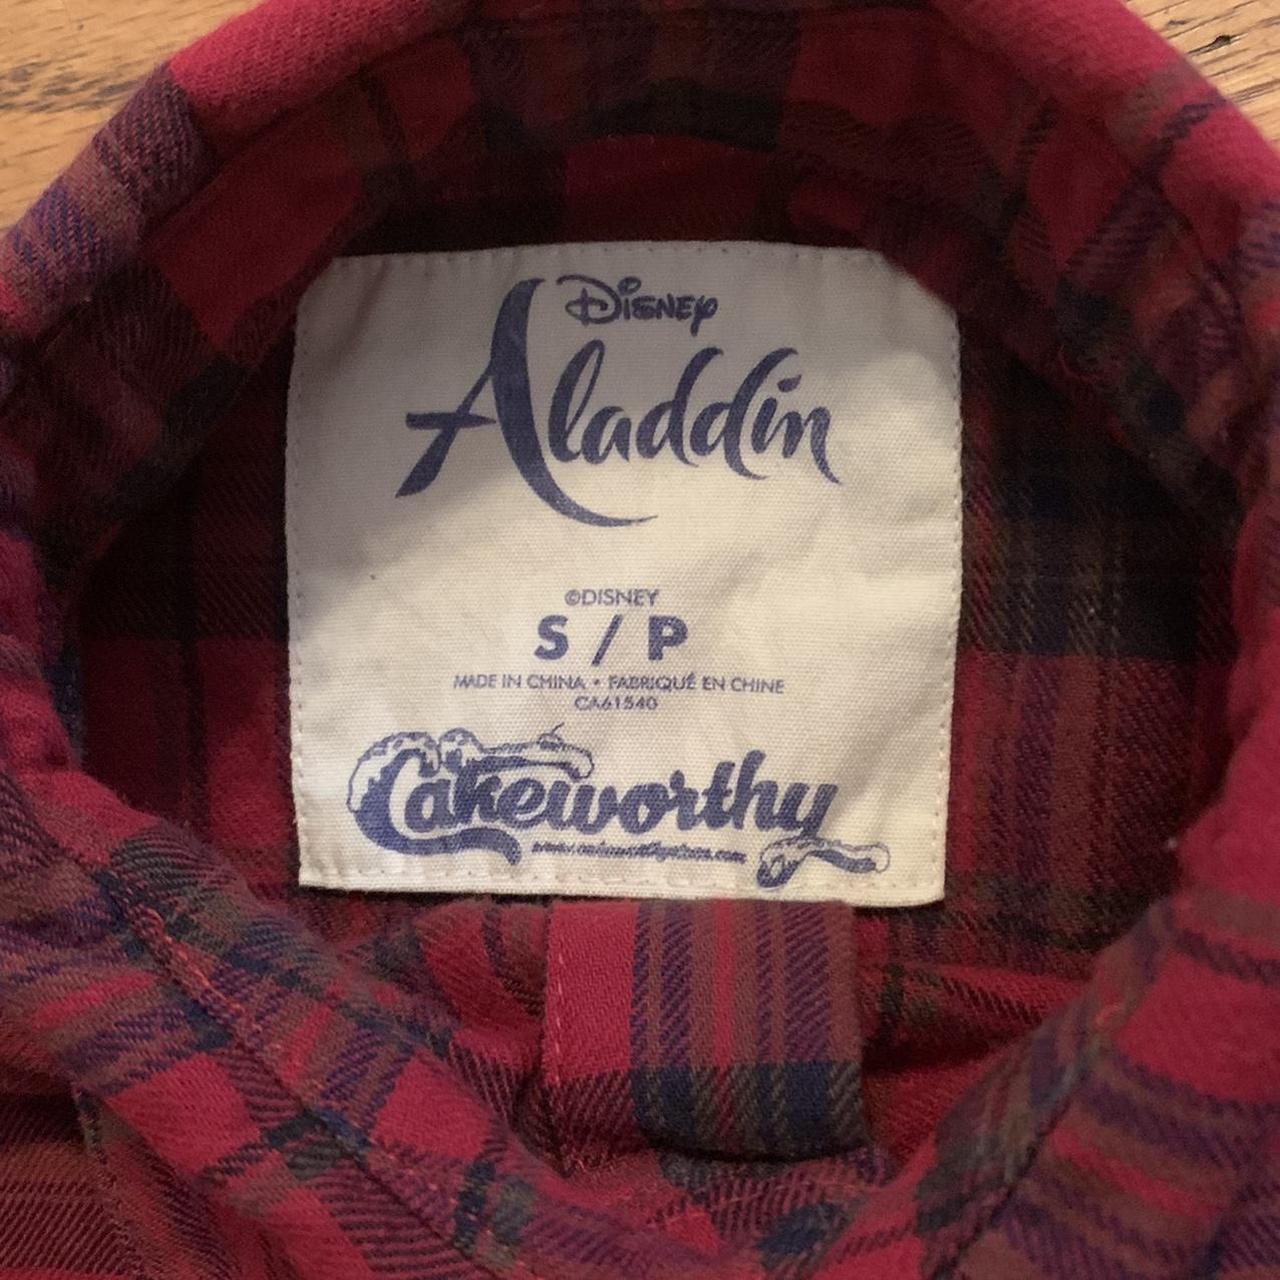 Product Image 3 - Disney’s Aladdin flannel from Cakeworthy.